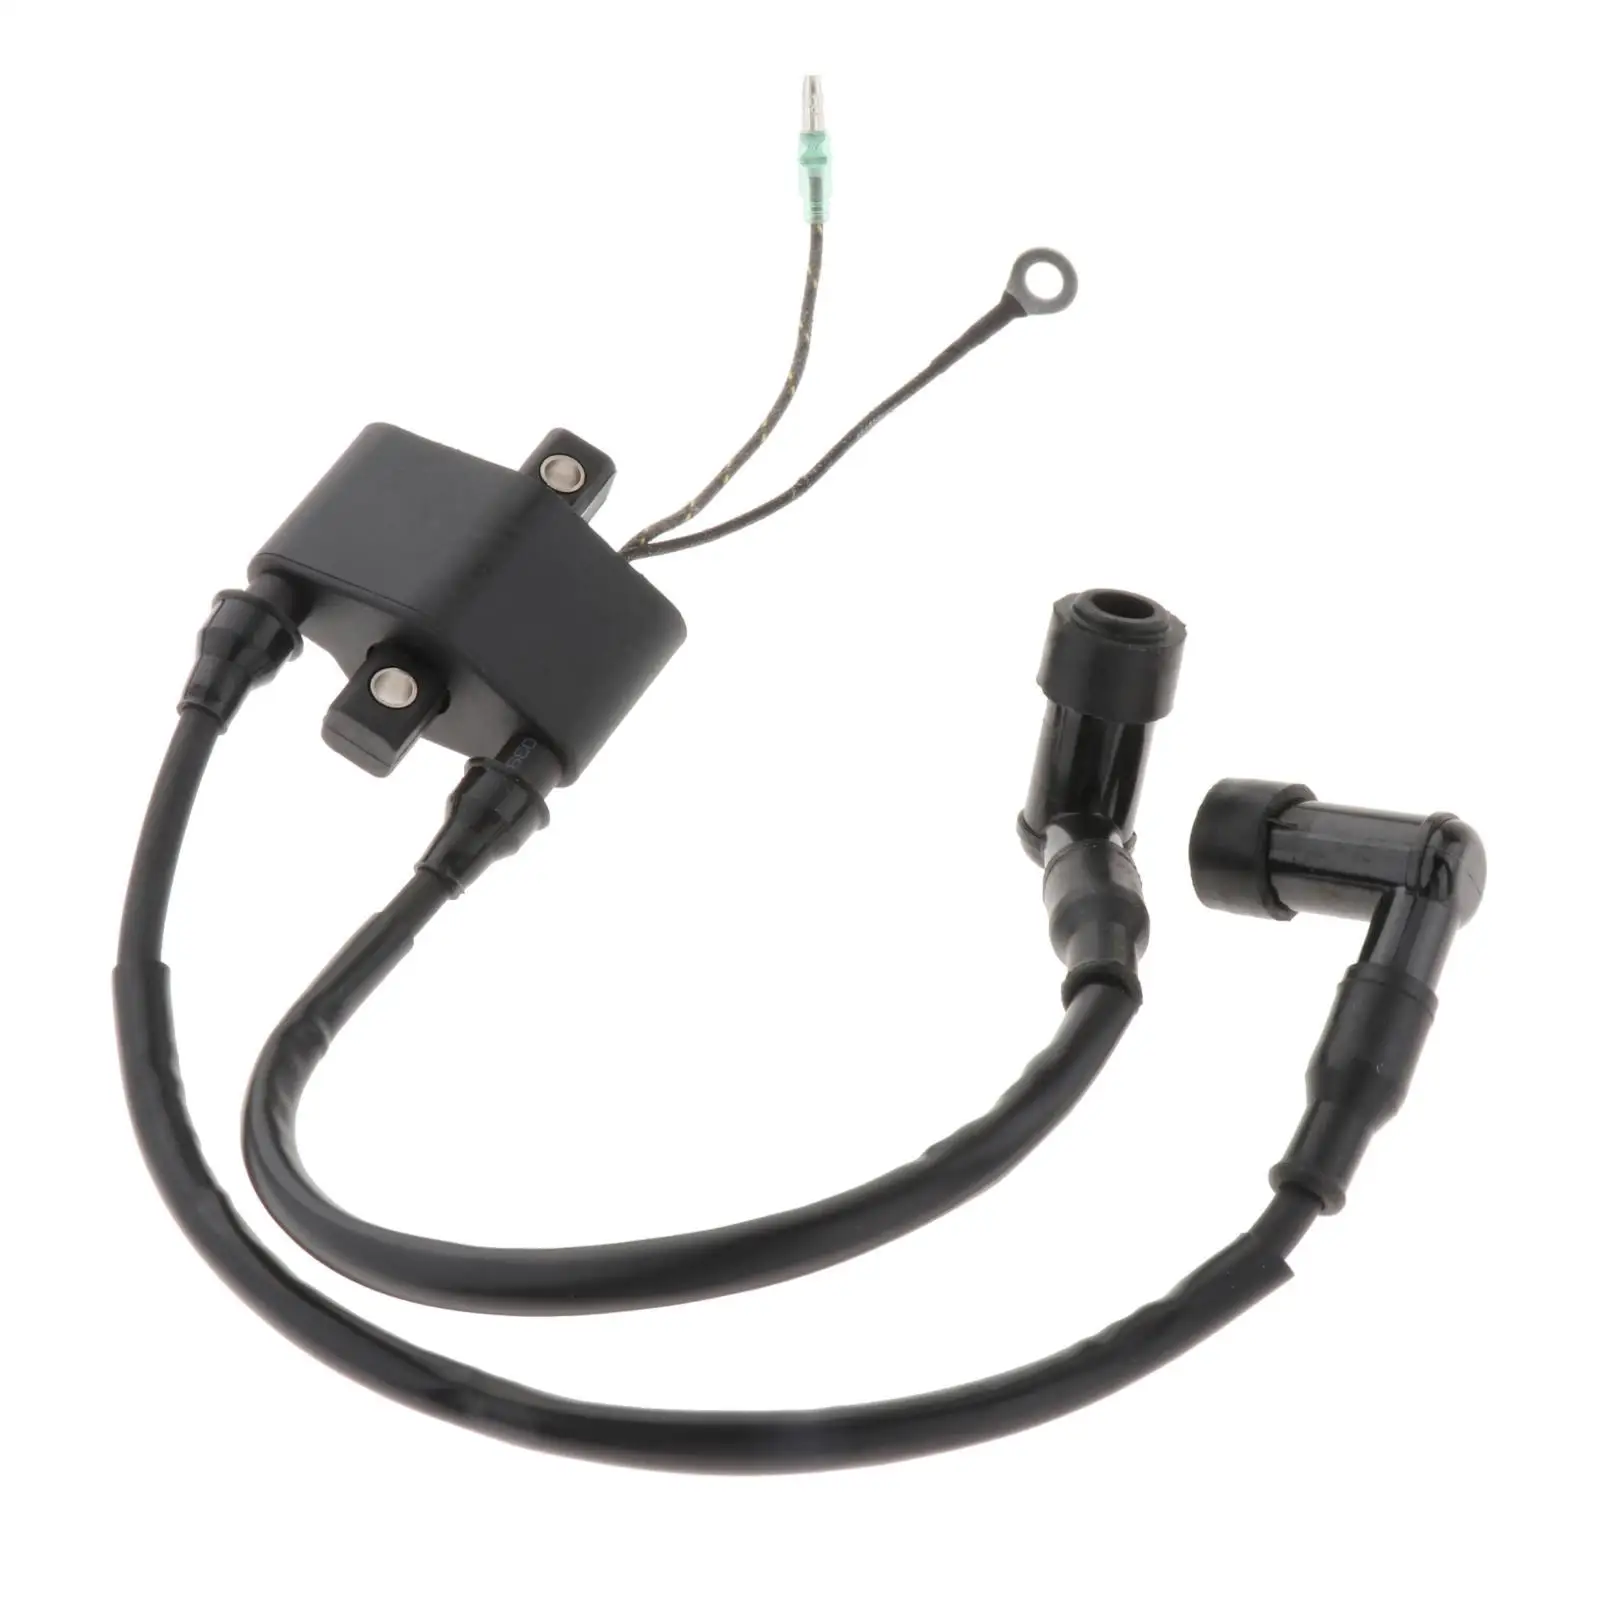 Ignition Coil Accessories Fit for Tohatsu for Nissan Outboard Boat Motor